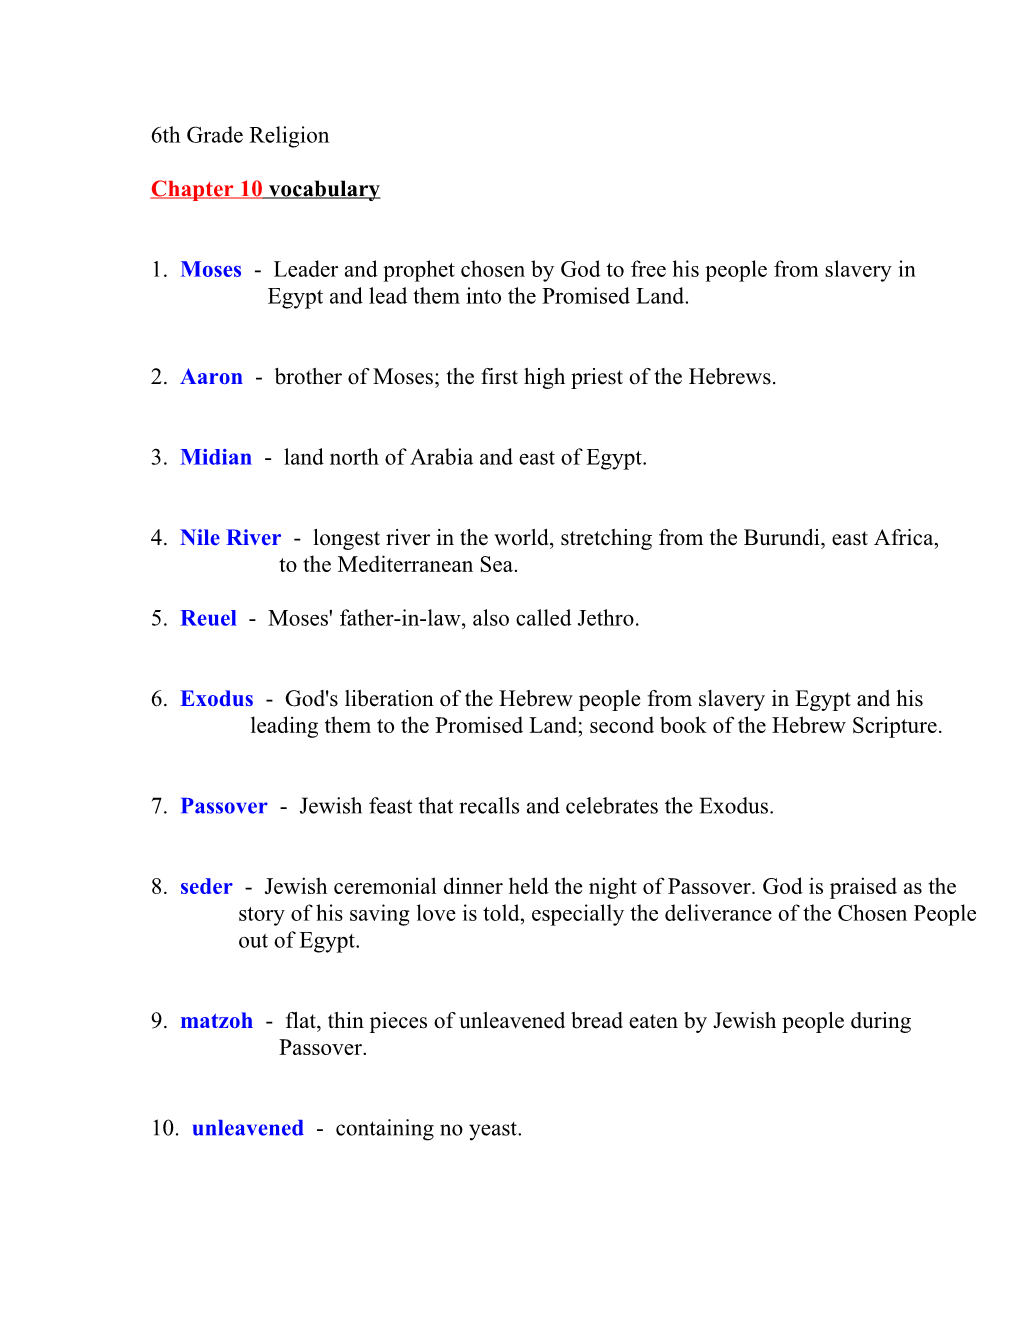 Chapter 10 Vocabulary